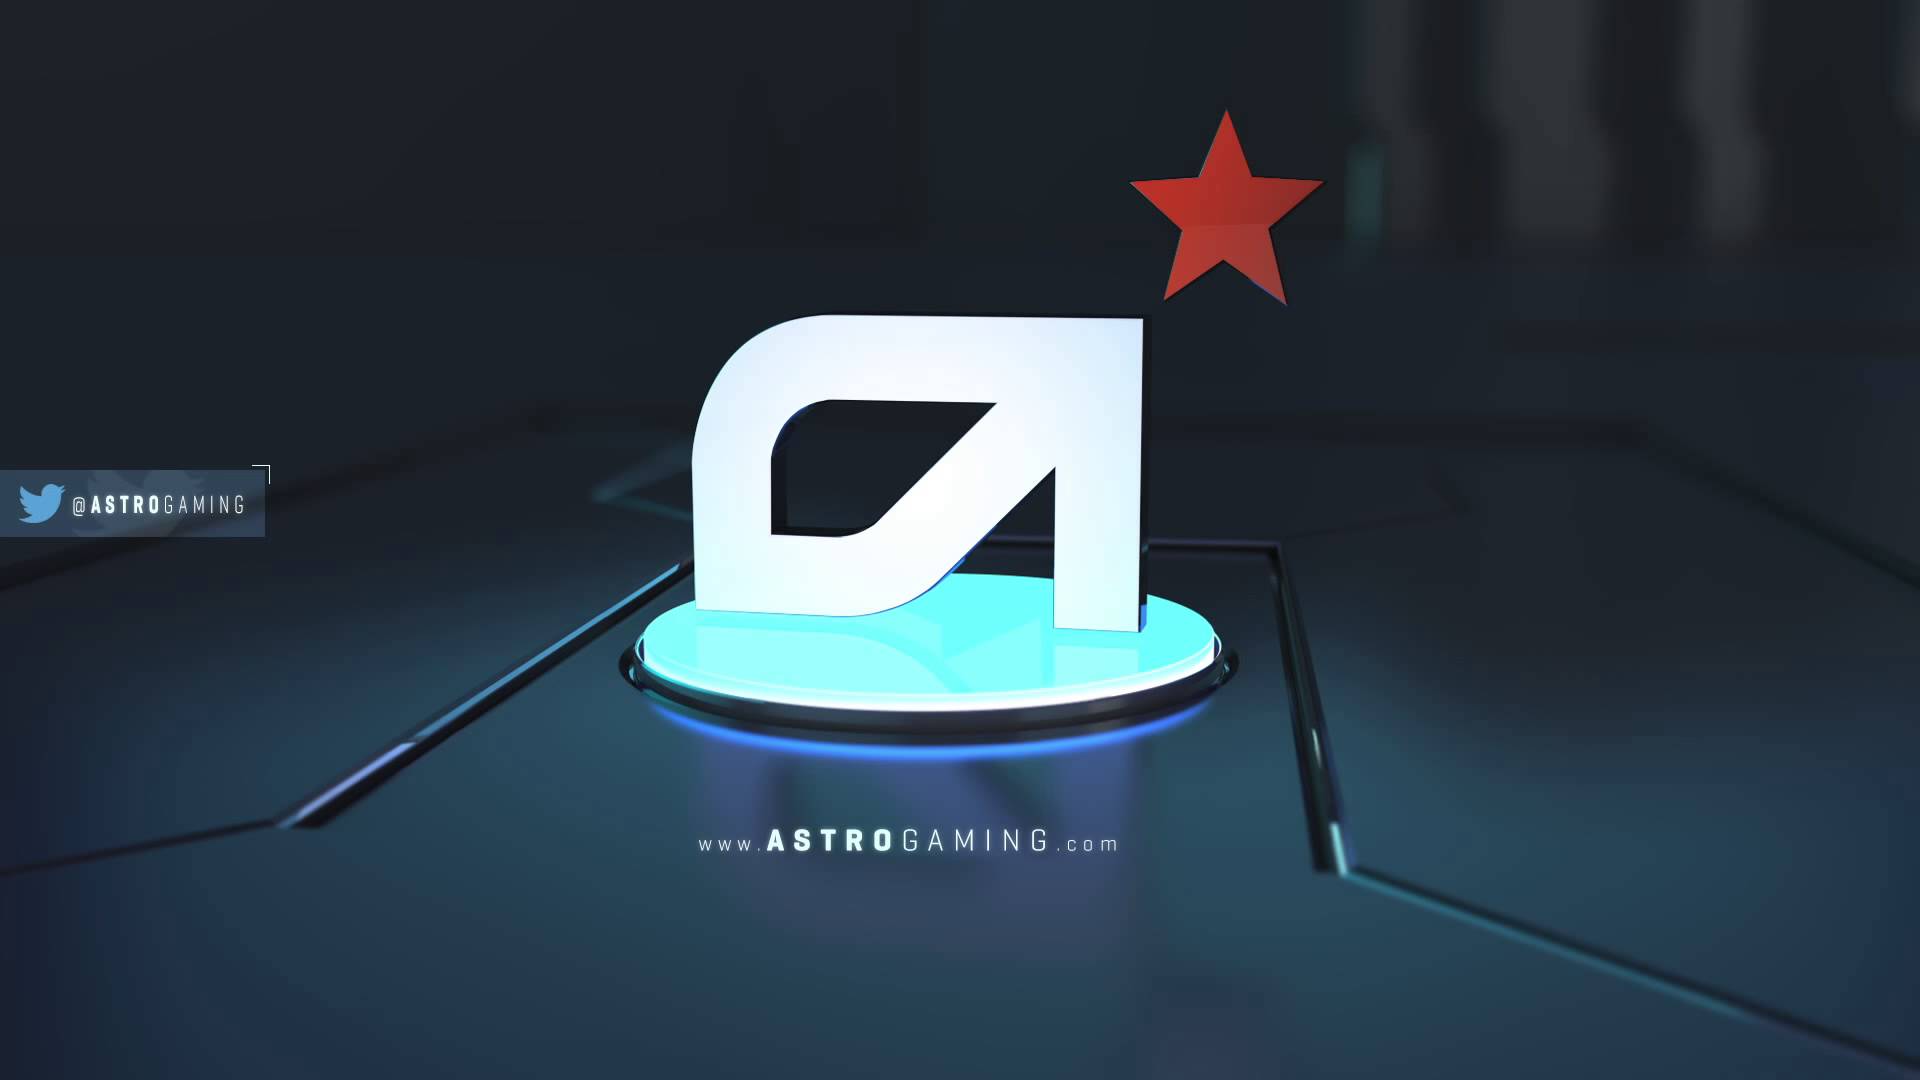 Astro Gaming Wallpapers 1920x1080